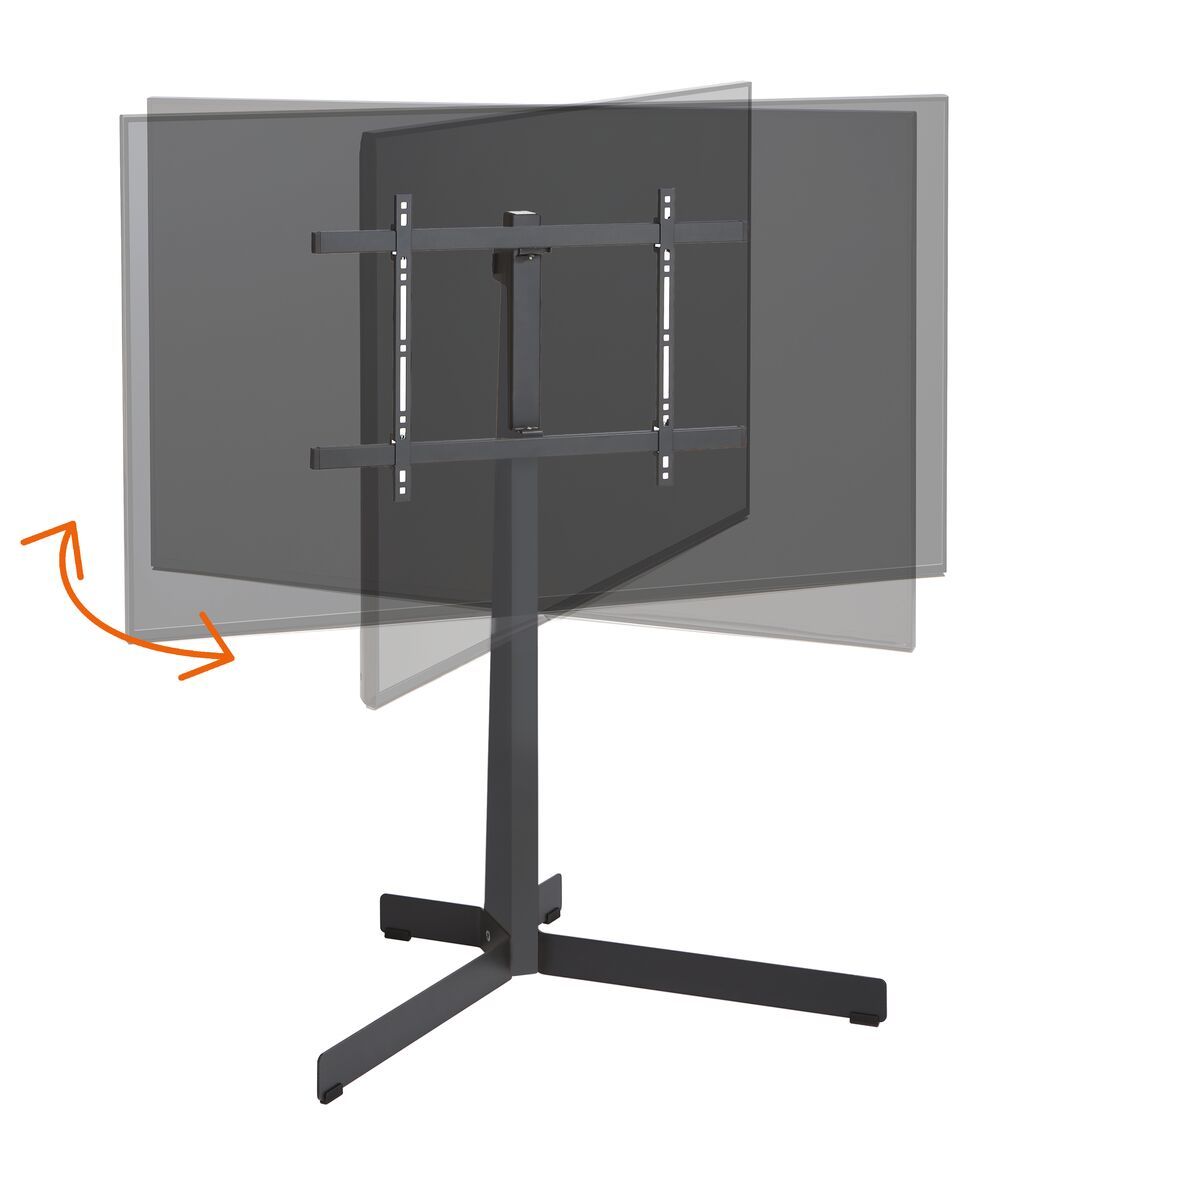 Vogel's TVS 3690 TV Floor Stand (black) - Suitable for 40 up to 77 inch TVs up to 50 kg - Application